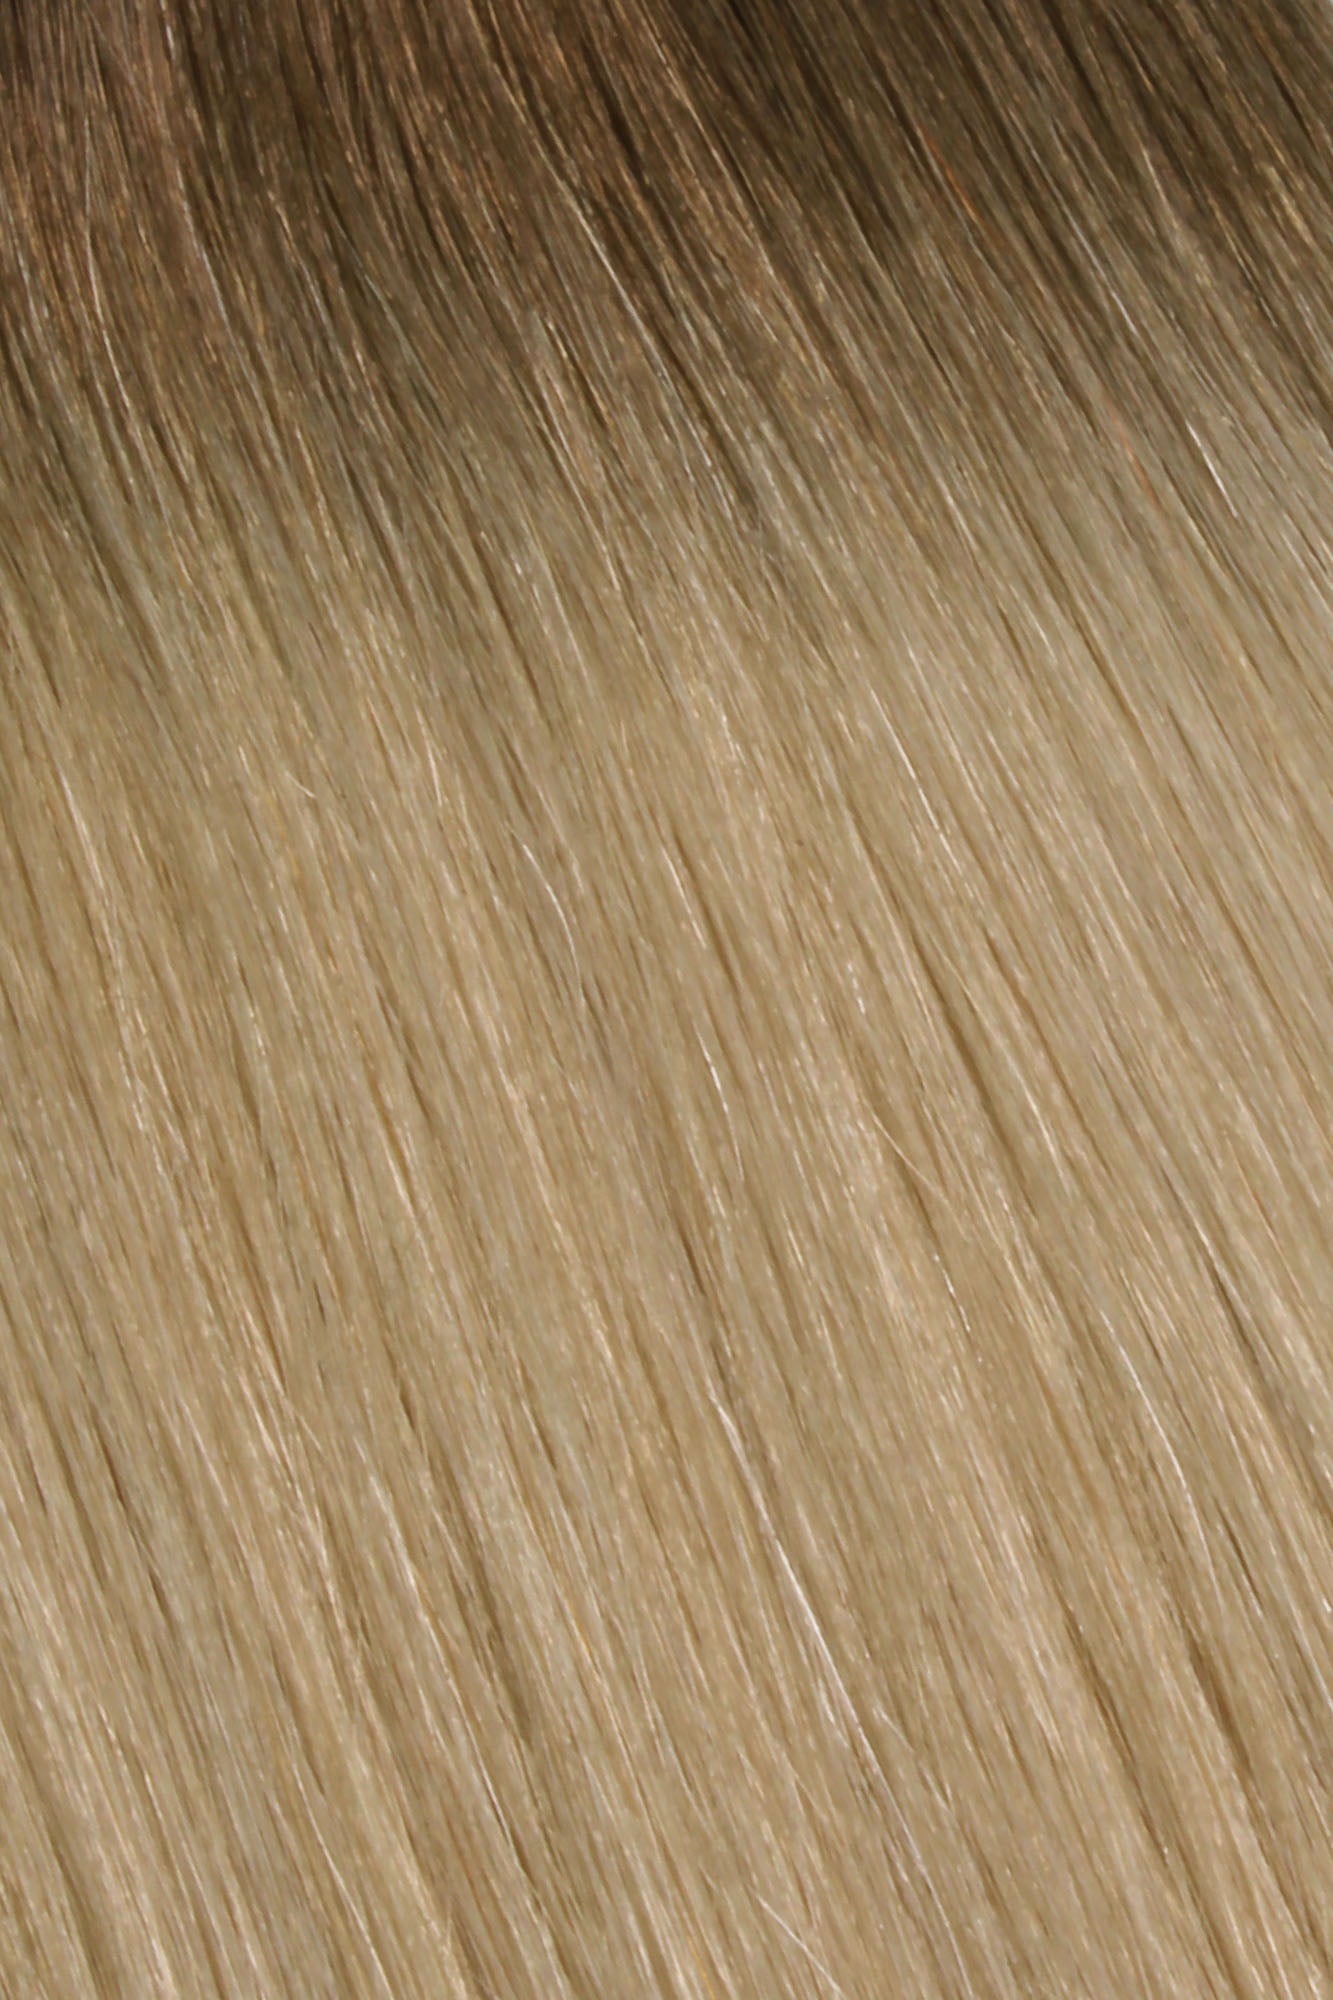 SEAMLESS® Flat Weft 22 Inches - SWAY Hair Extensions Rooted-Beach-Ash-Blonde-R5-9-613 Natural SEAMLESS® Flat Weft 22 Inches extensions. Thin, flexible, and discreet. 100% Double Drawn Remy Human Hair. Versatile and reusable